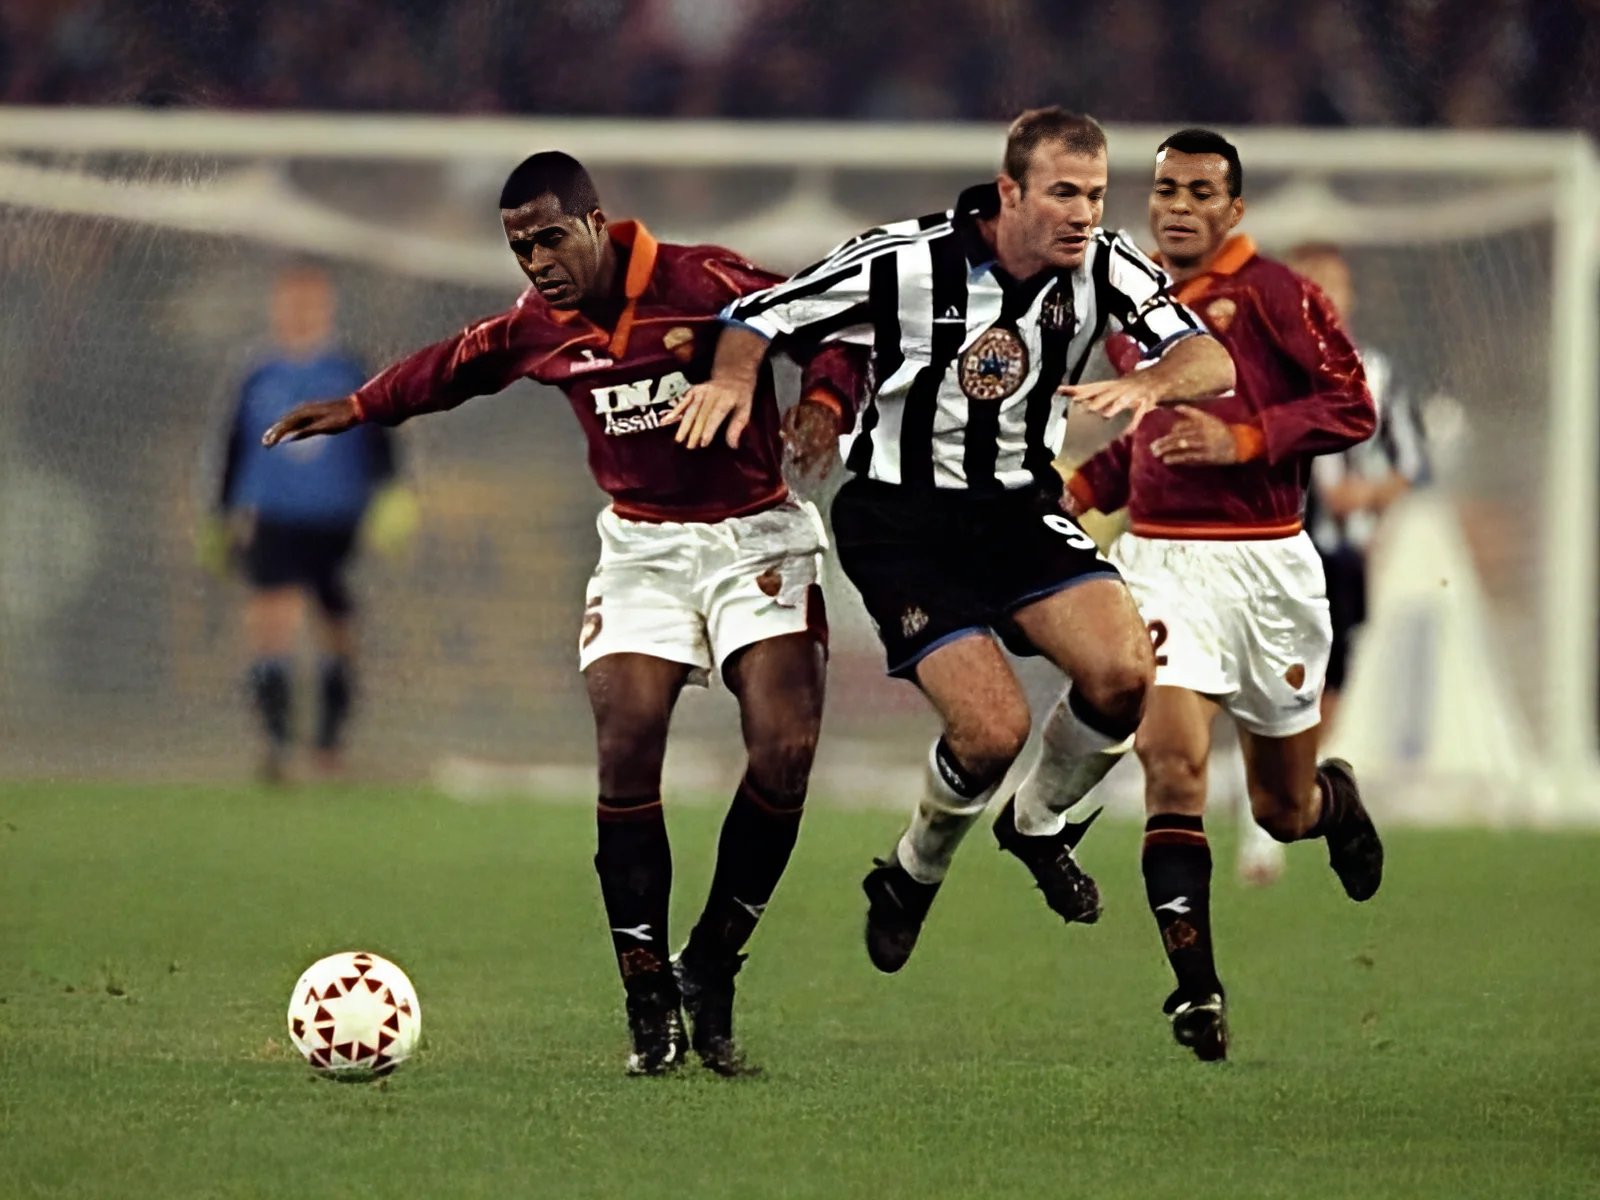 Cafu Playing For Roma vs Newcastle United in 1999 enhanced image ○ Soccer Blade